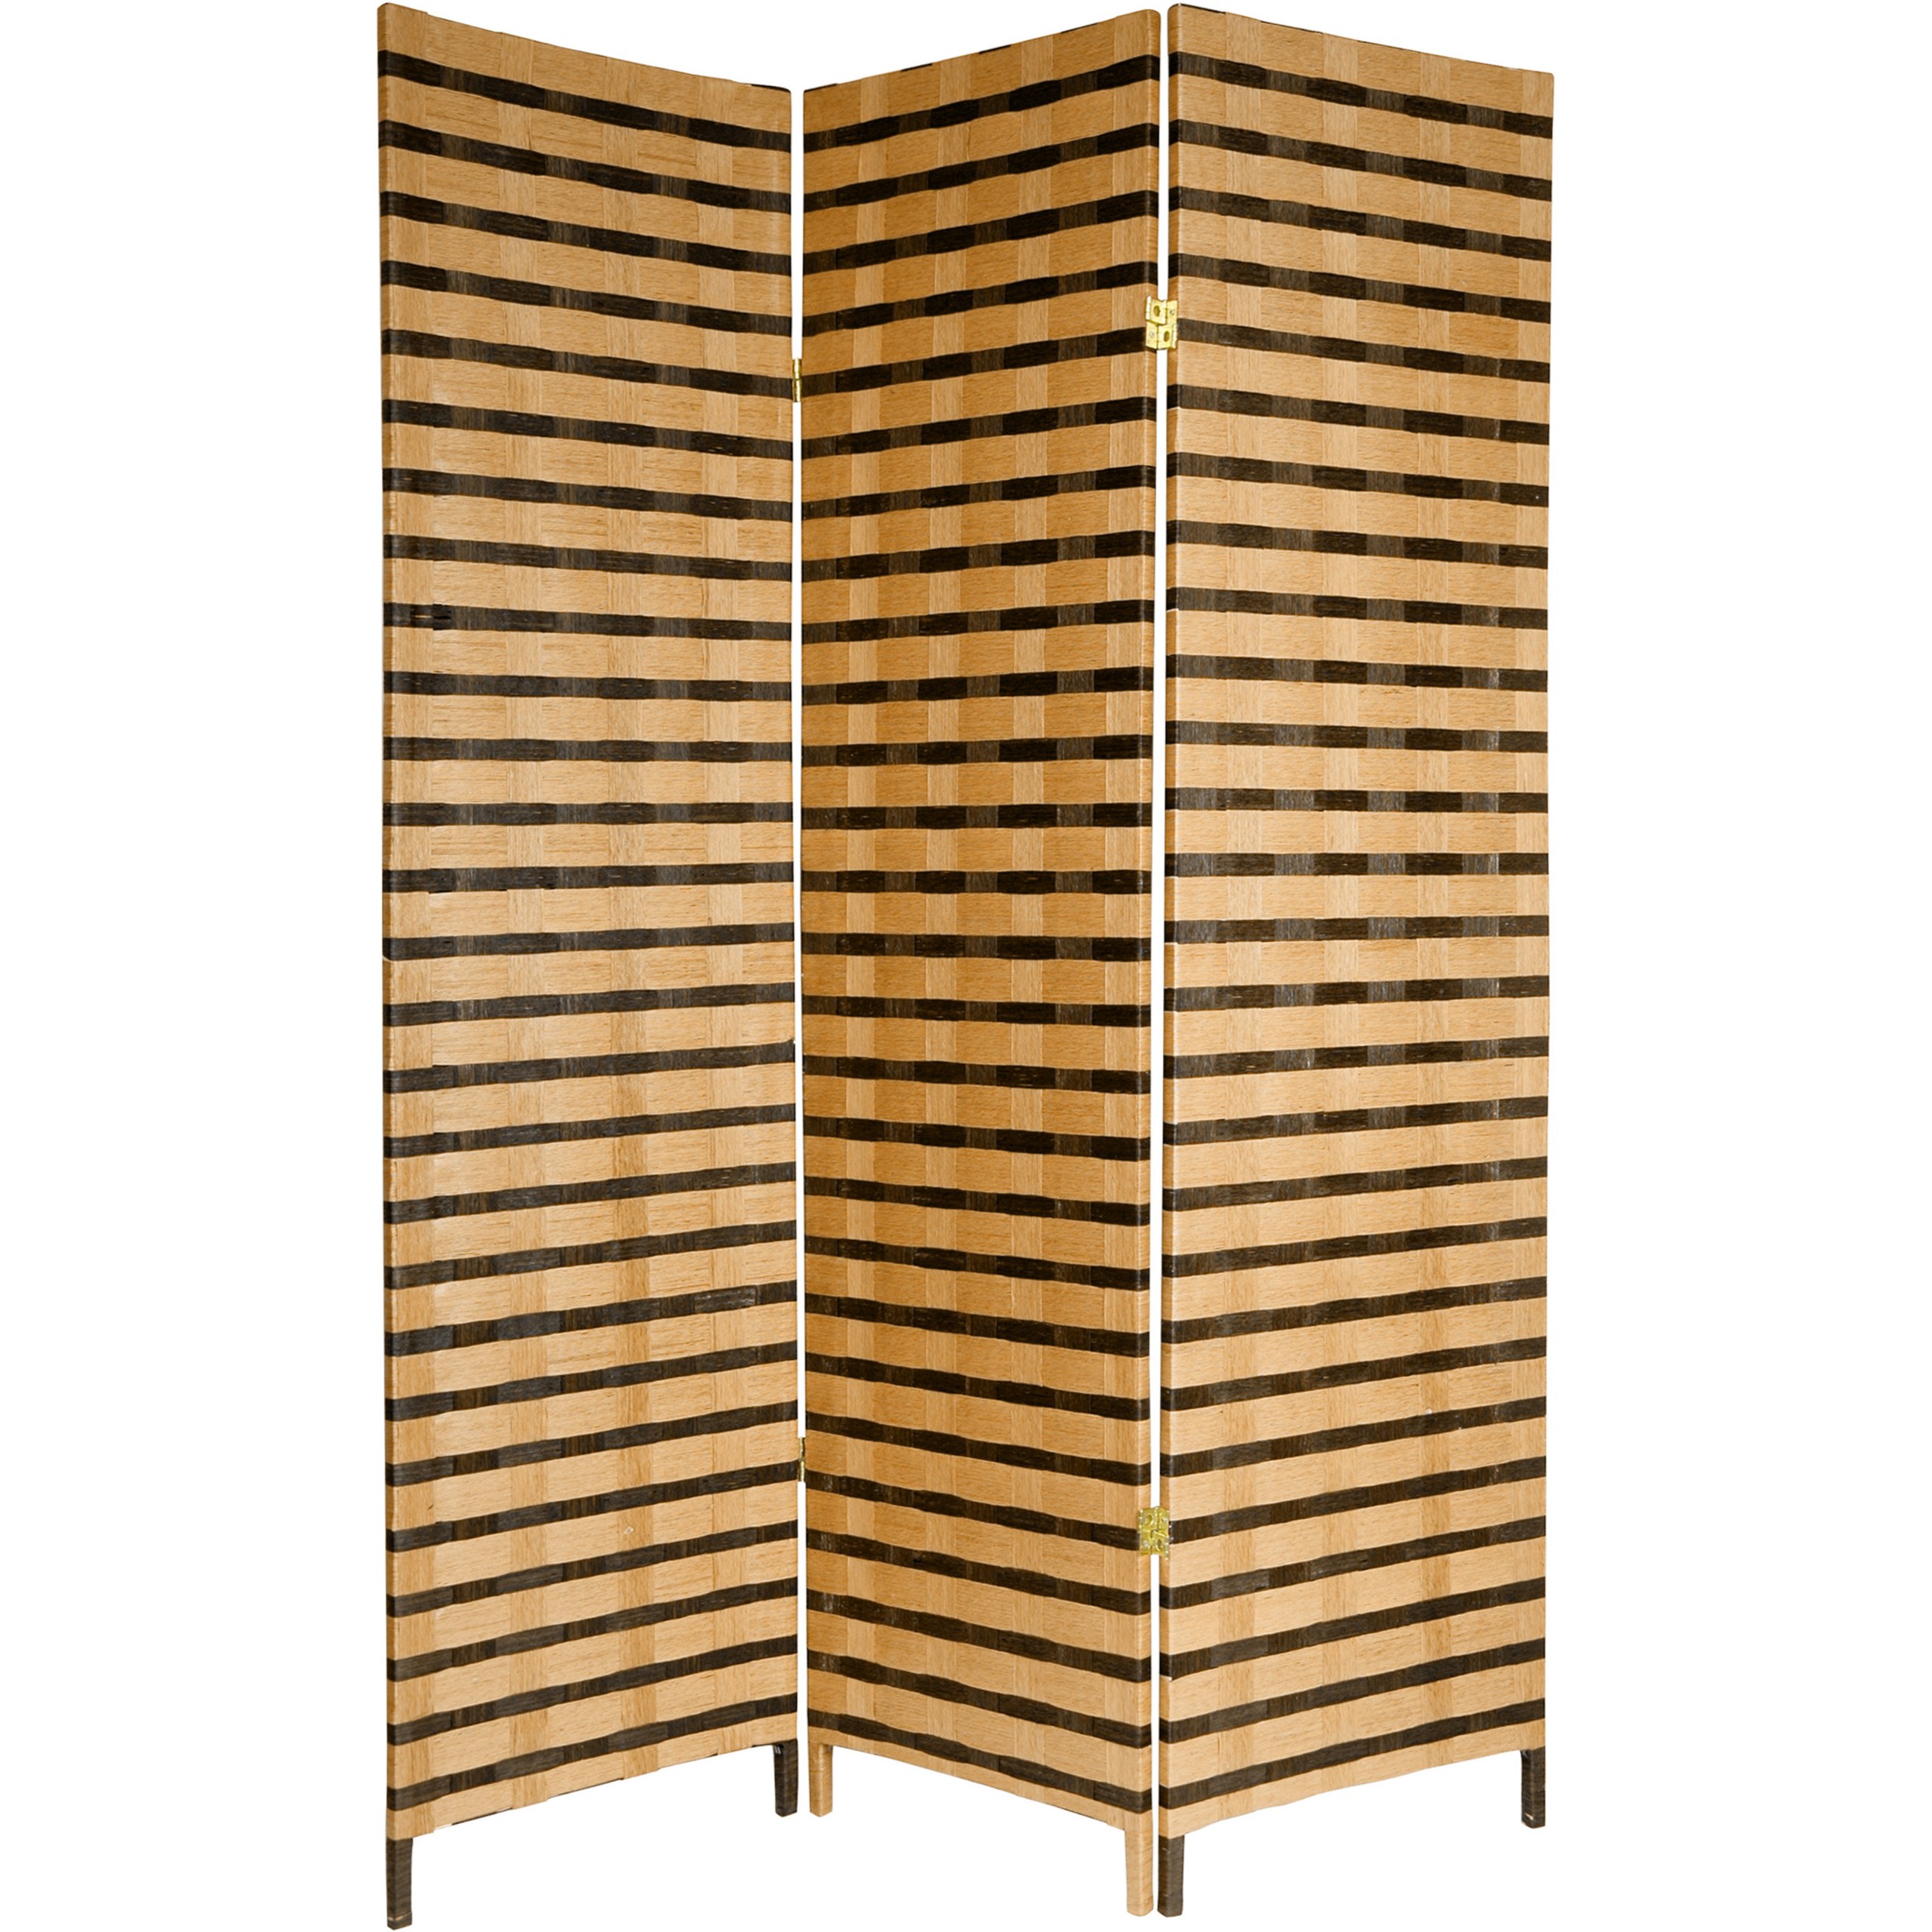 Oriental Furniture Good Simple Inexpensive Durable Room Divider, 6-Feet Rattan Style Two Tone Woven Fiber Folding Screen Partition, 3 Panel